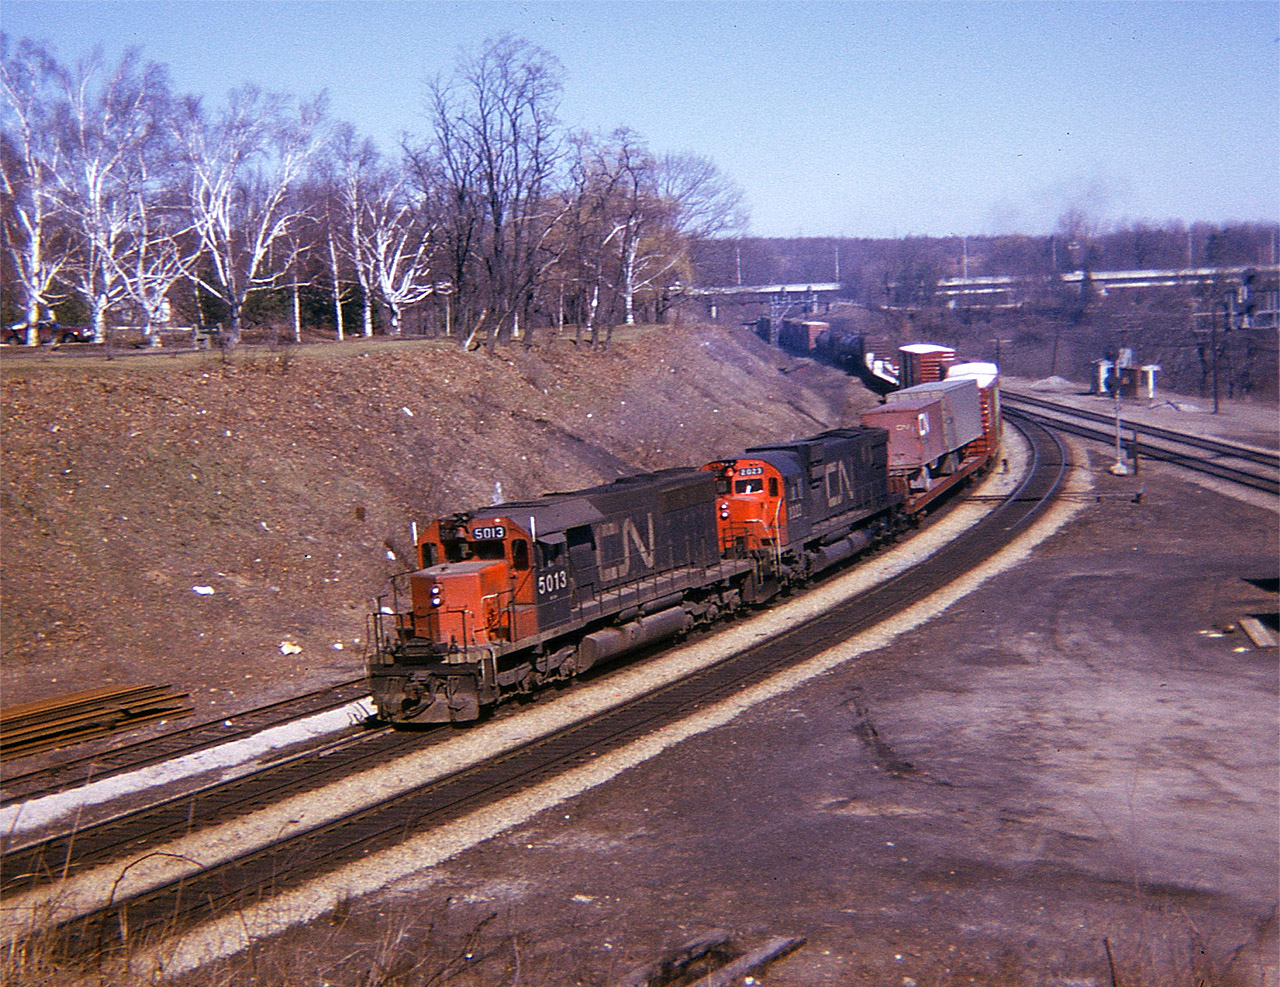 Basic Bayview:  To start off the New Year 2017 offered up here is a basic shot of Bayview Junction as it would appear back in the pre-spring days of 1974. Open and barren. CN 5013 and 2023 are pulling a westbound around the bend, I think back then speed restrictions to 15 MPH, but have forgotten. The 'third' track is still intact; the old location in which engines back in the steam days waited to assist the westbounds up the long 9 mile grade thru Copetown. It is now just a stub, used by MoW, note track stored there. One thing that has not changed over the years is the abundance of litter, the melting snows leave so much to be undesired each spring.